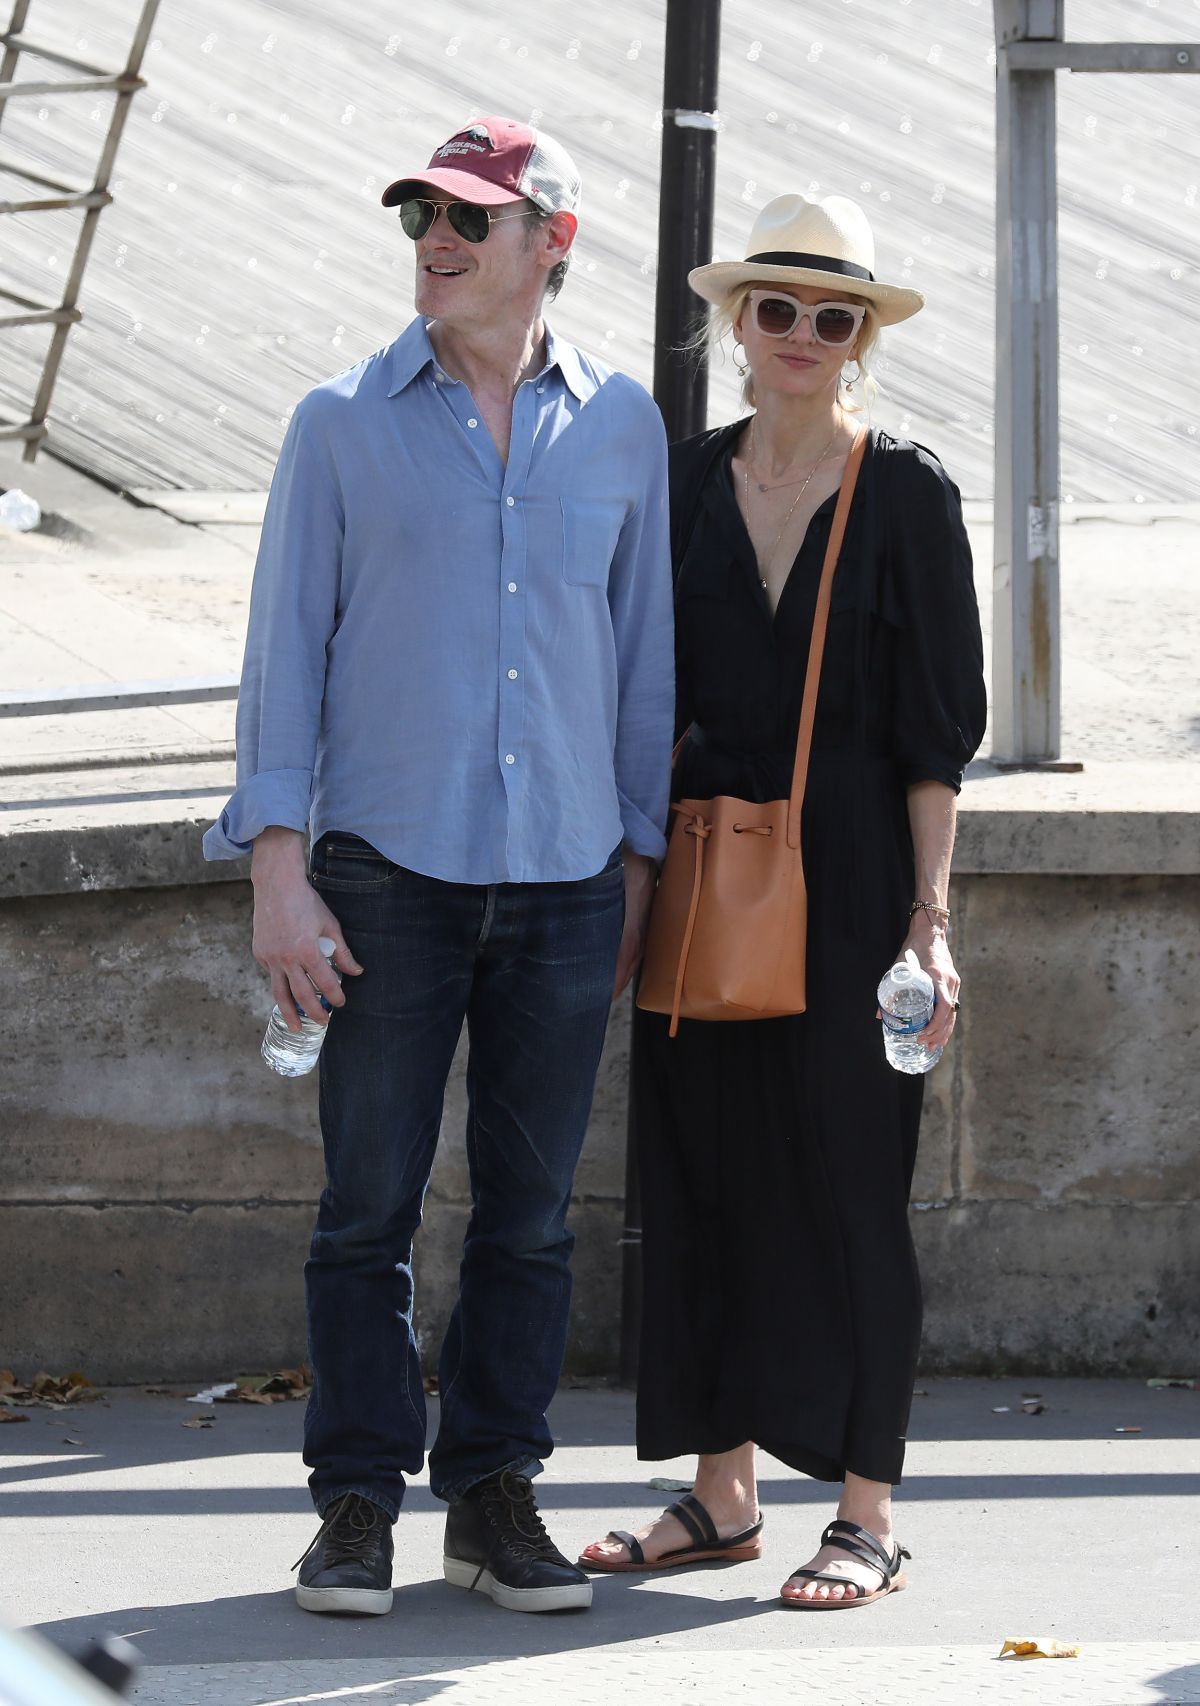 naomi-watts-and-billy-crudup-out-in-paris-07-04-2018-10.jpg